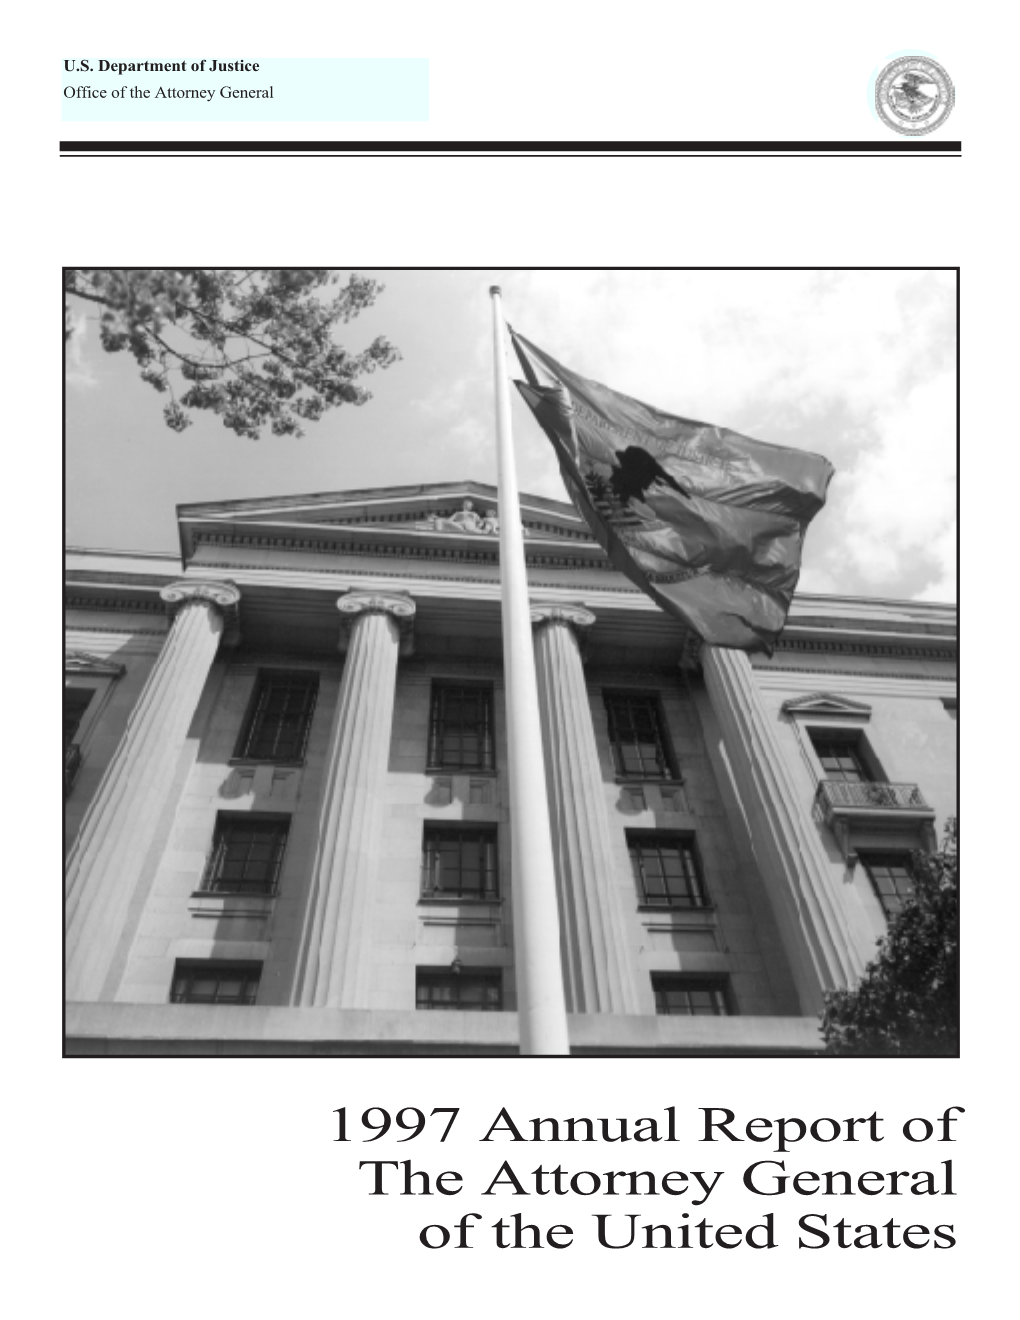 1997 Annual Report of the Attorney General of the United States